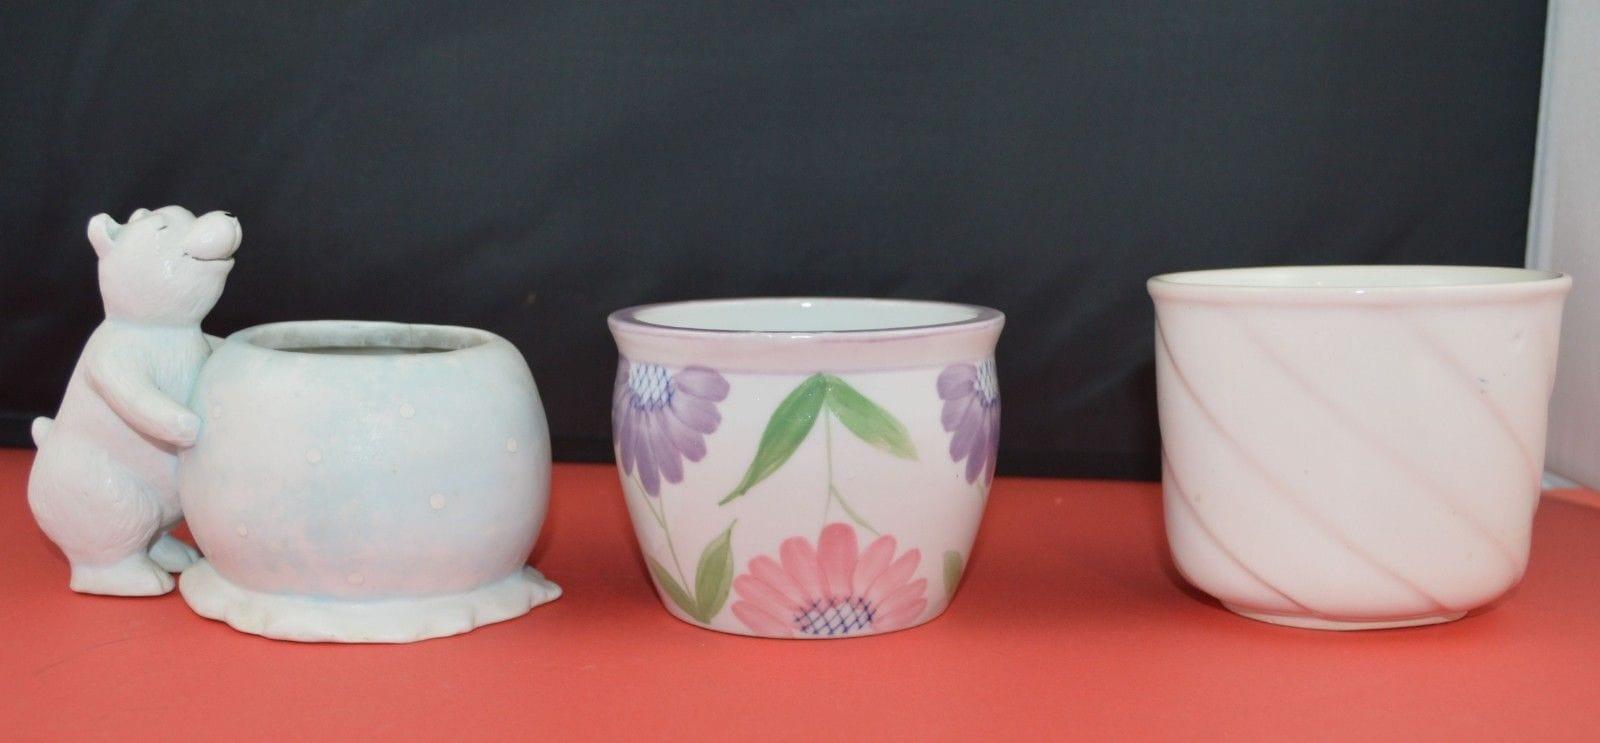 THREE POTTERY PLANTERS ONE WHITE ONE FLORAL ONE WITH A POLAR BEAR(PREVIOUSLY OWNED) GOOD CONDITION - TMD167207